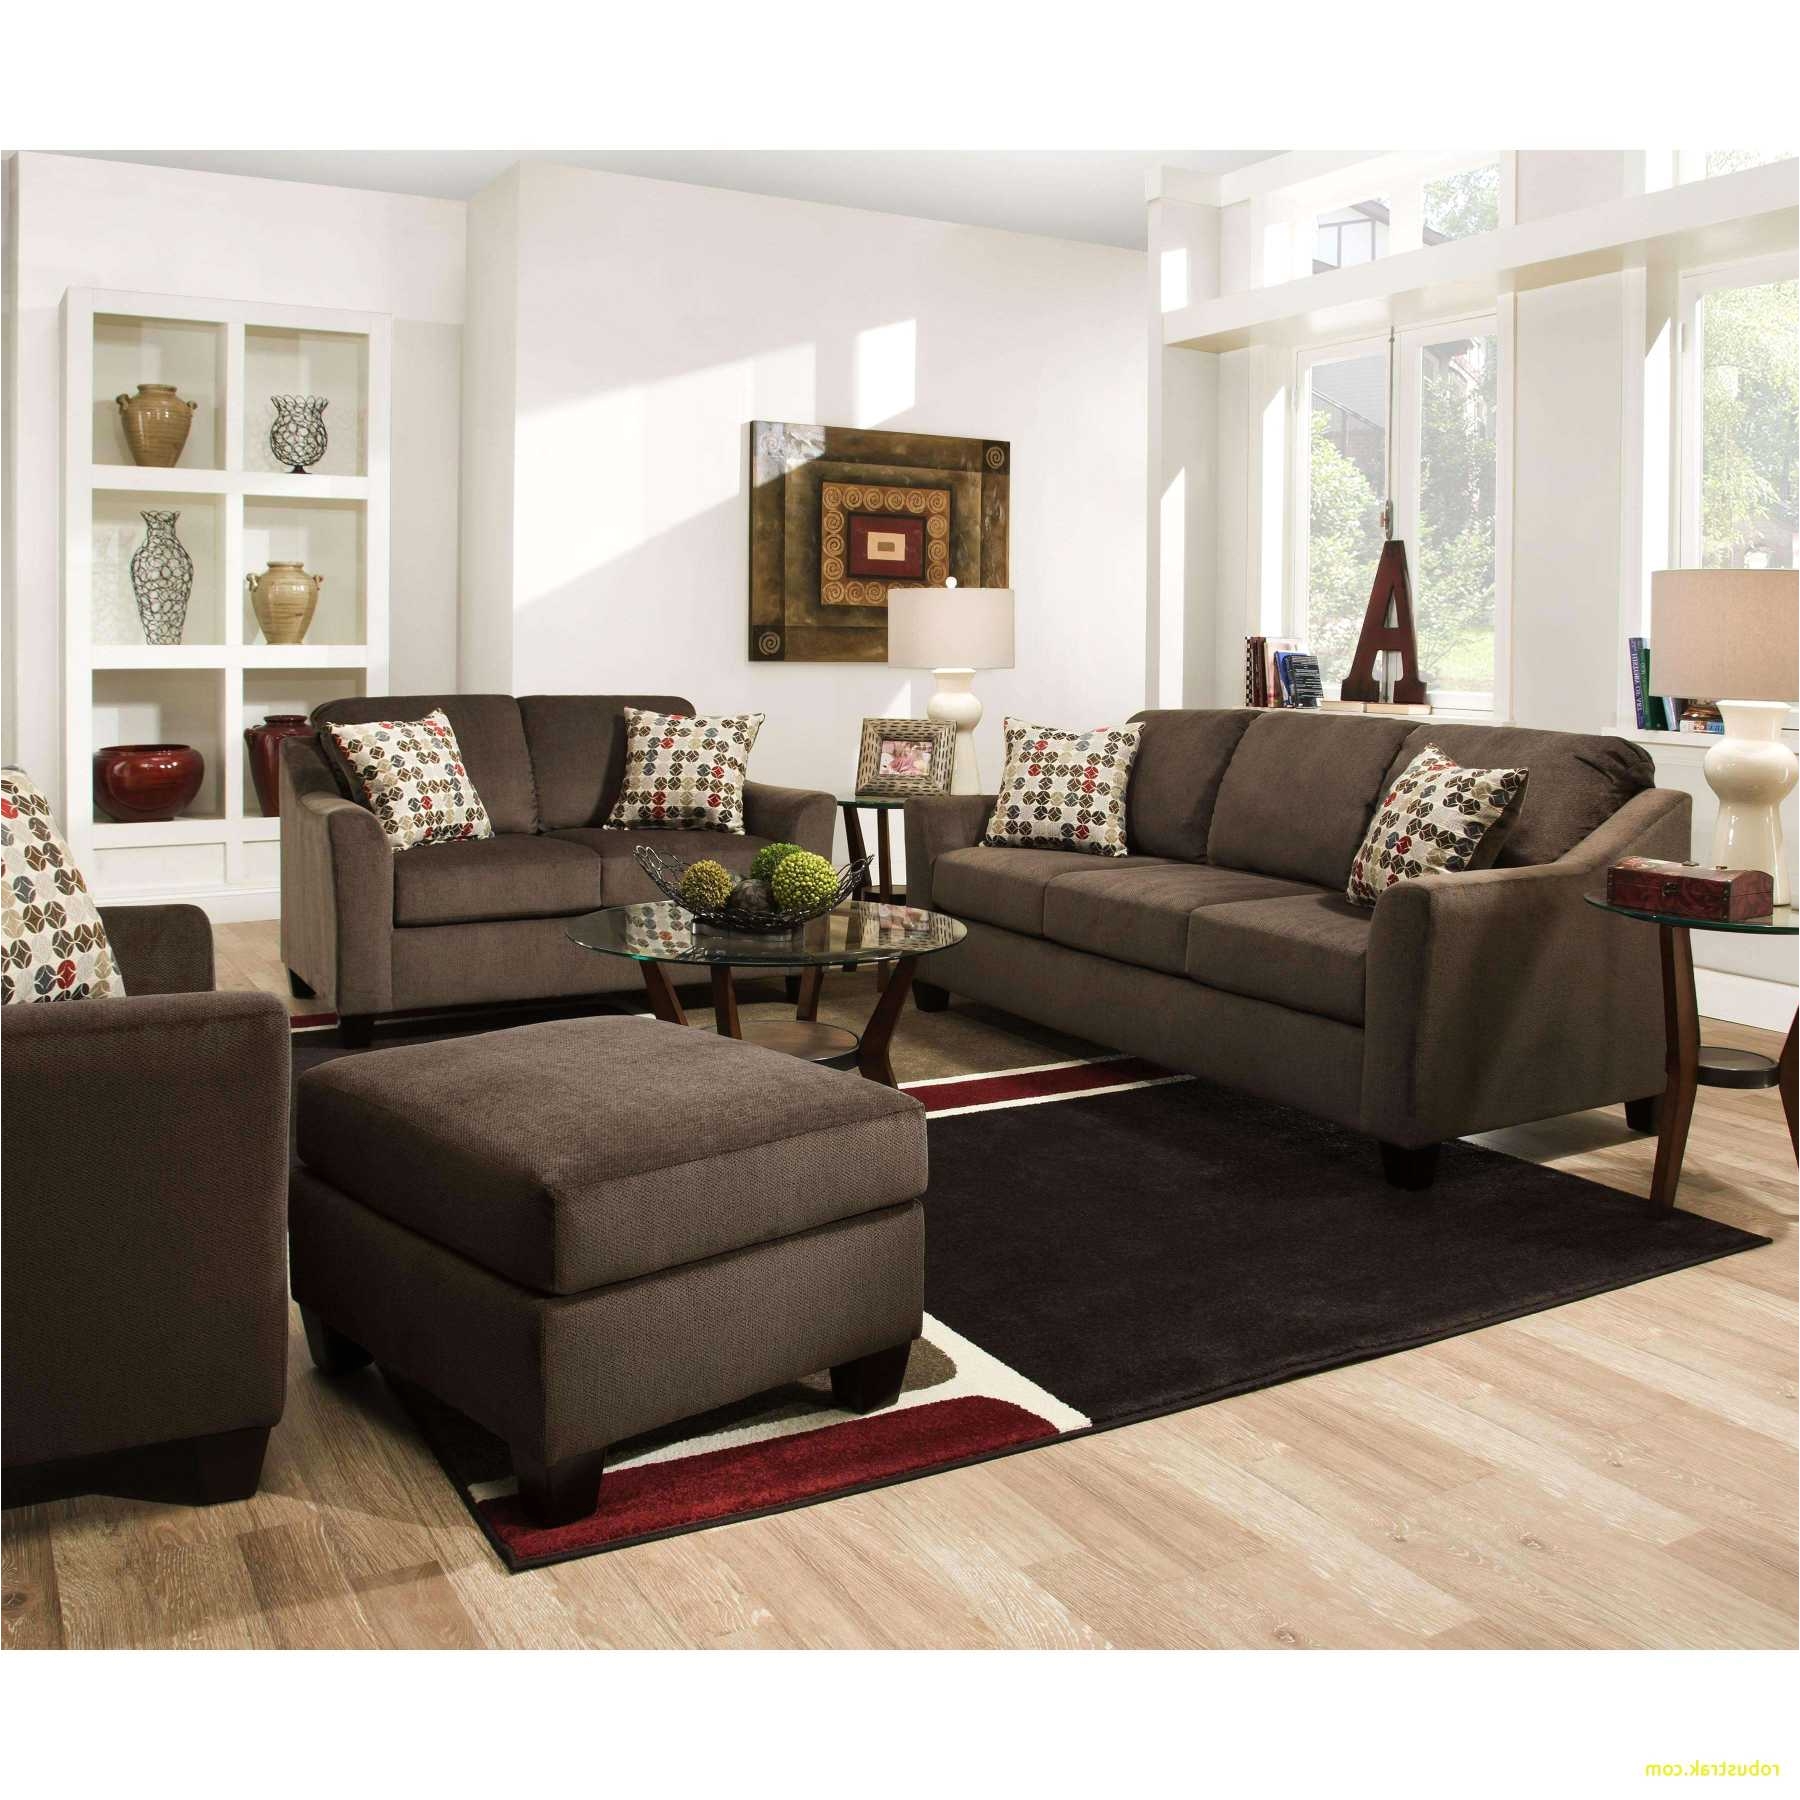 Best Place to Finance Furniture Information Cheap Furniture Places that Deliver Furniture Information